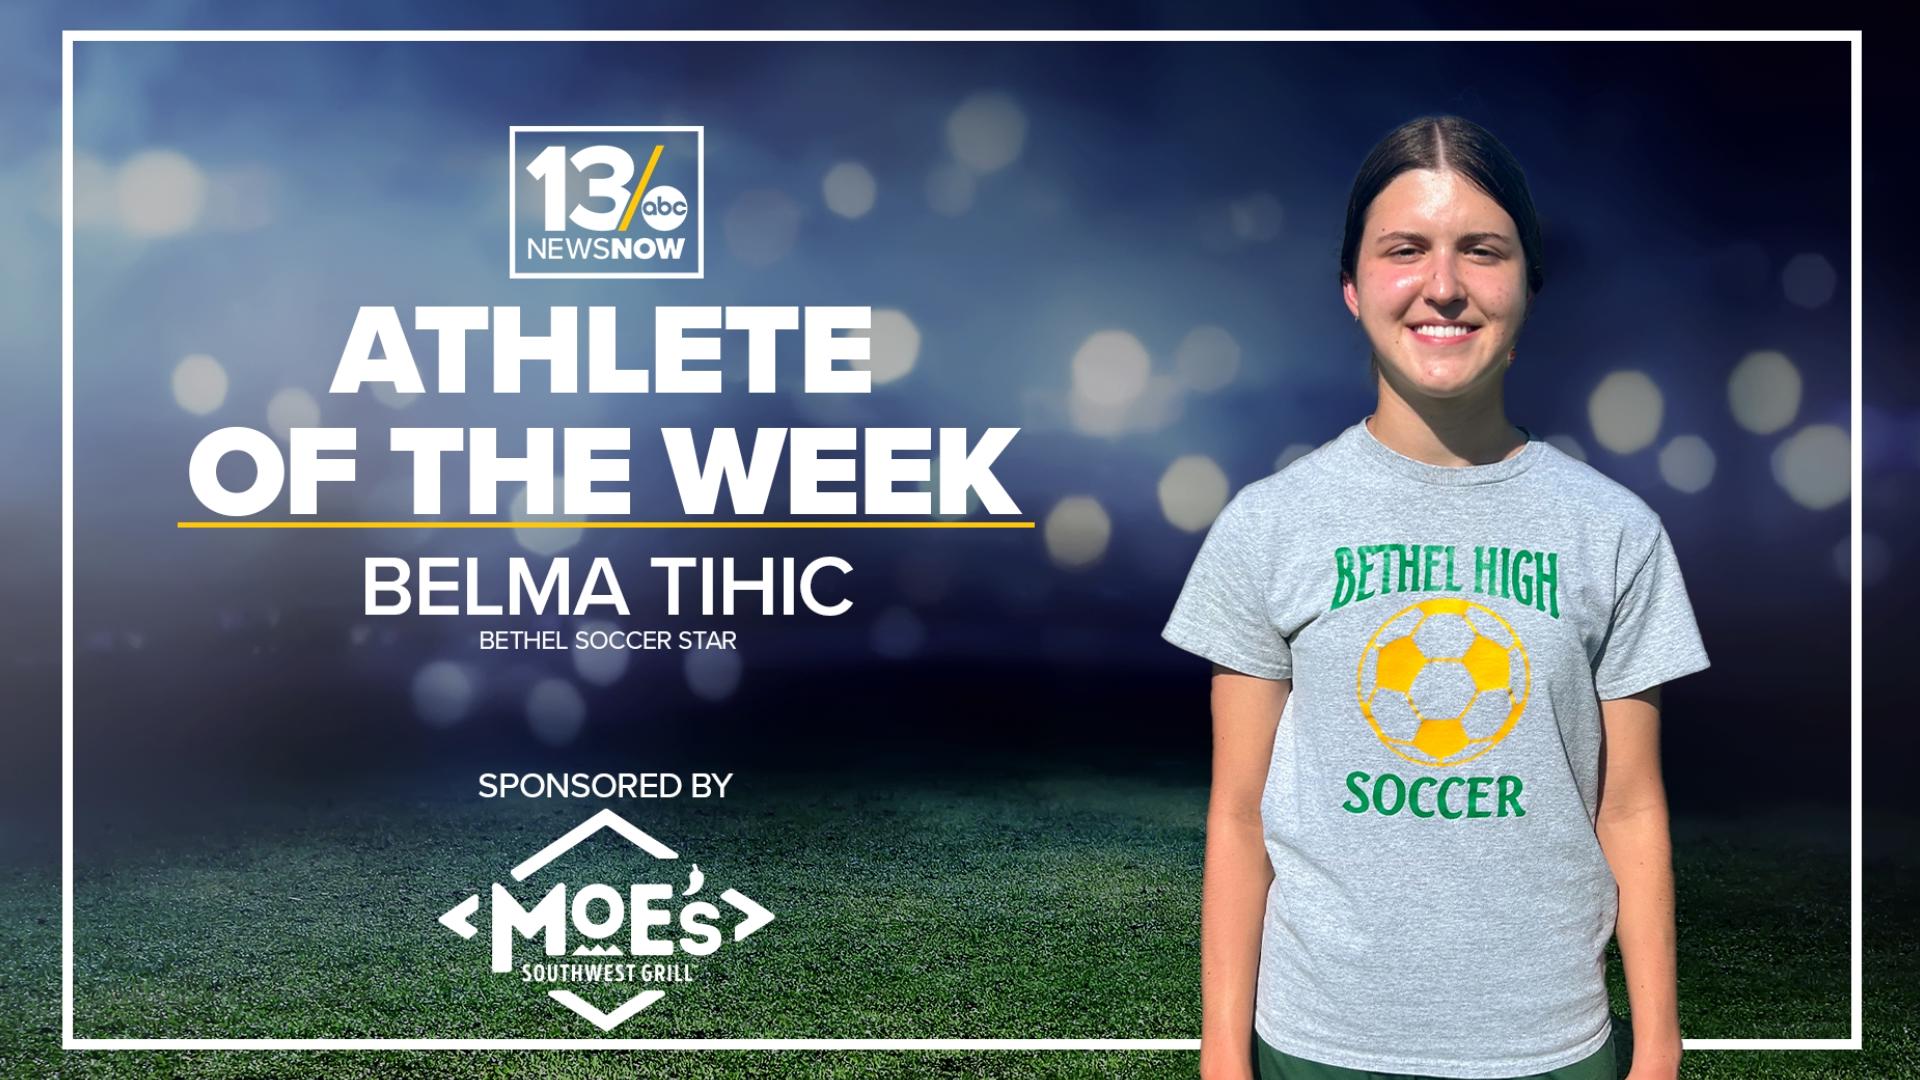 A junior, Belma Tihic is now Captain of the Bethel girls’ varsity soccer team and is one of the top scorers in the state.